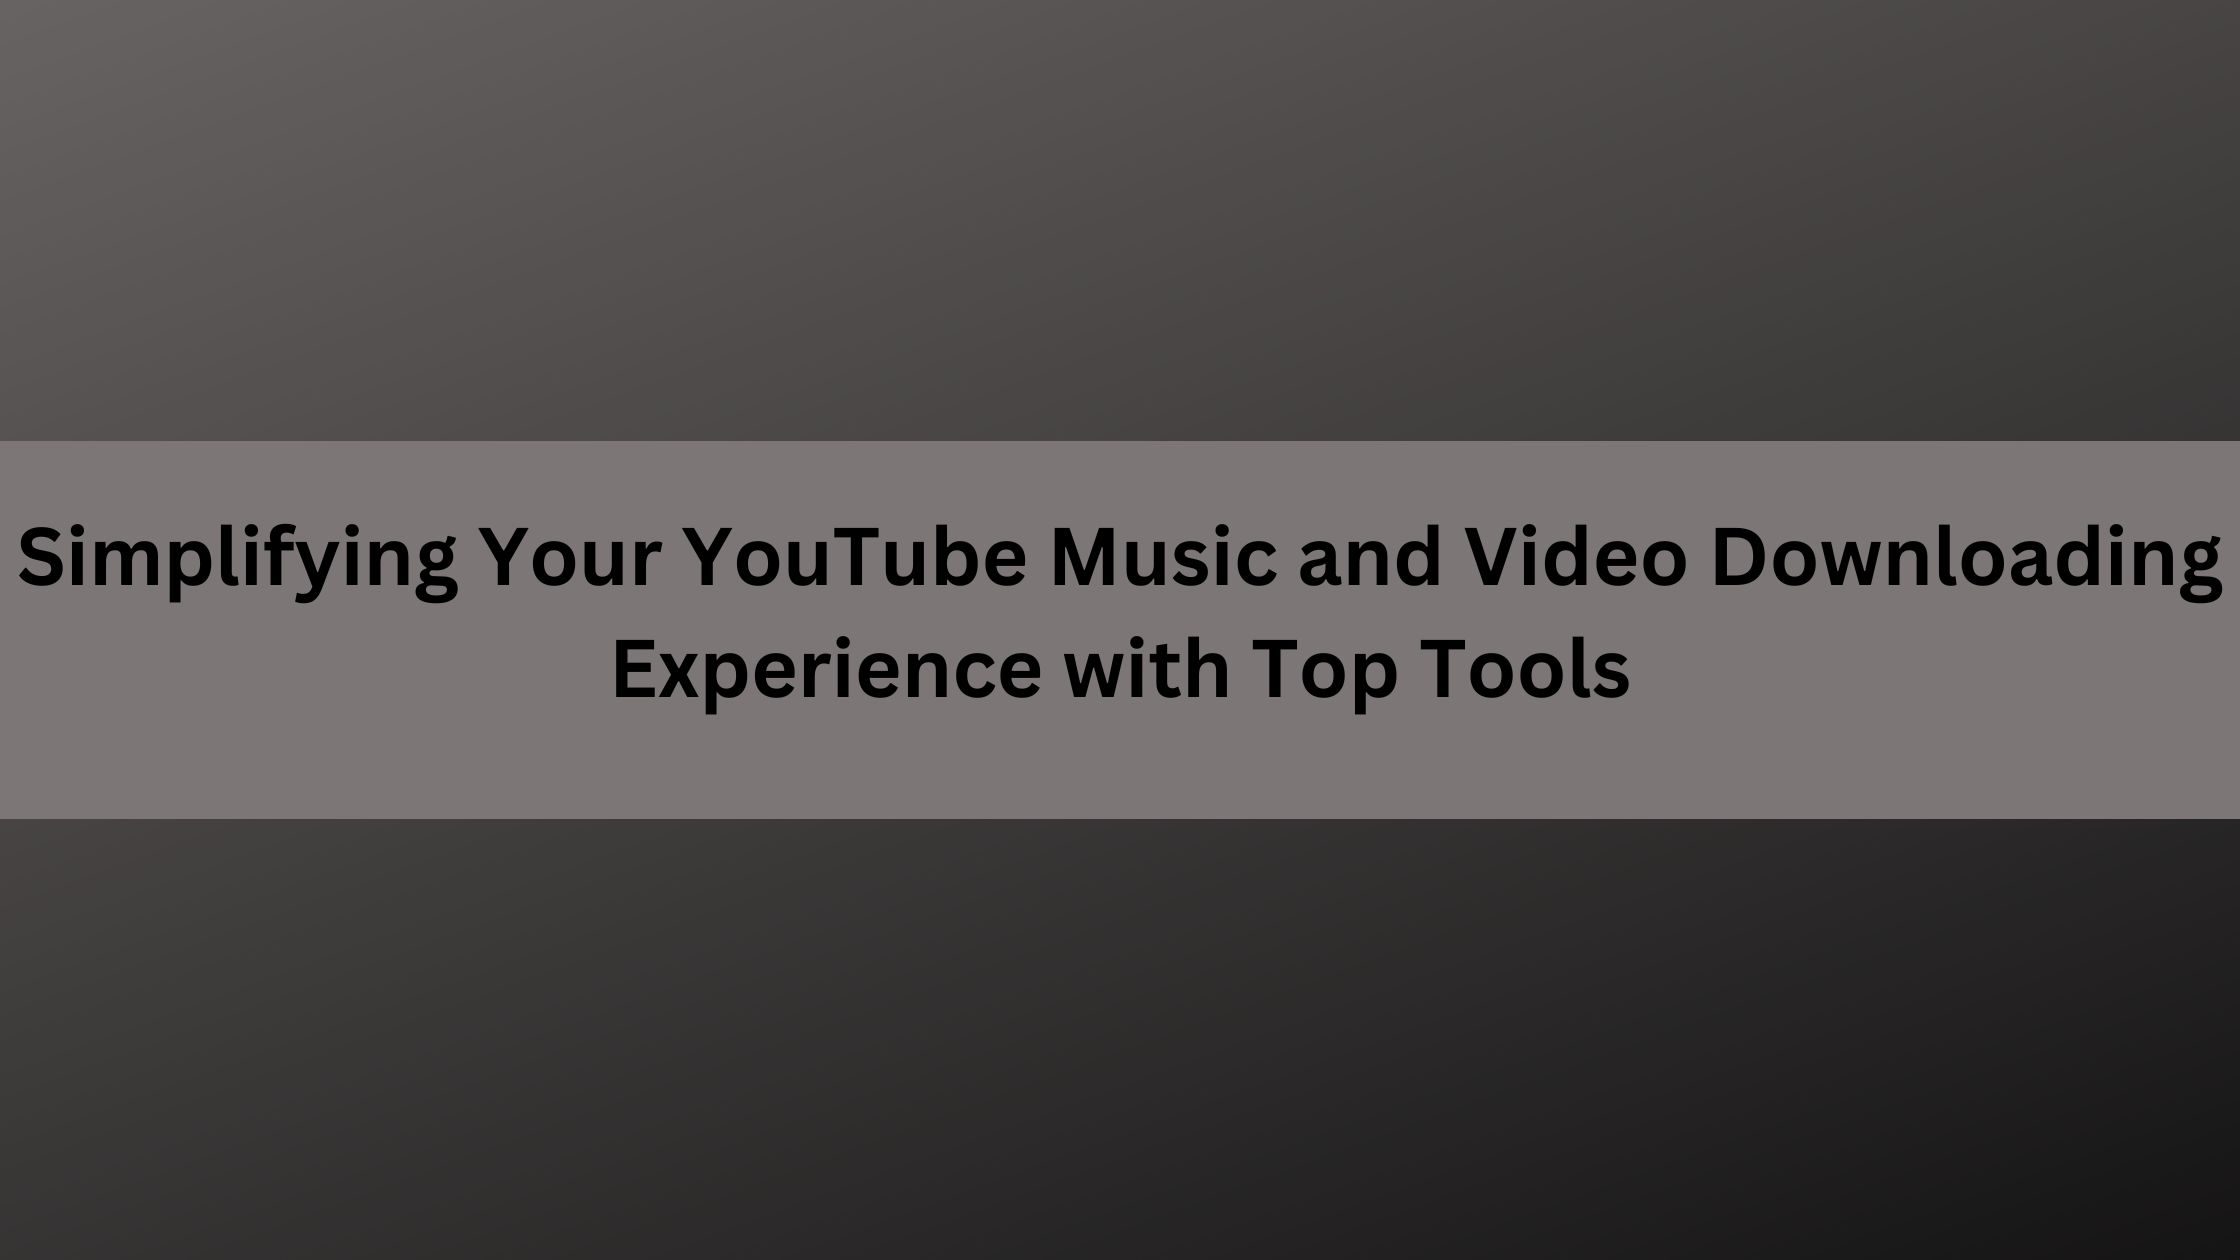 Simplifying Your YouTube Music and Video Downloading Experience with Top Tools